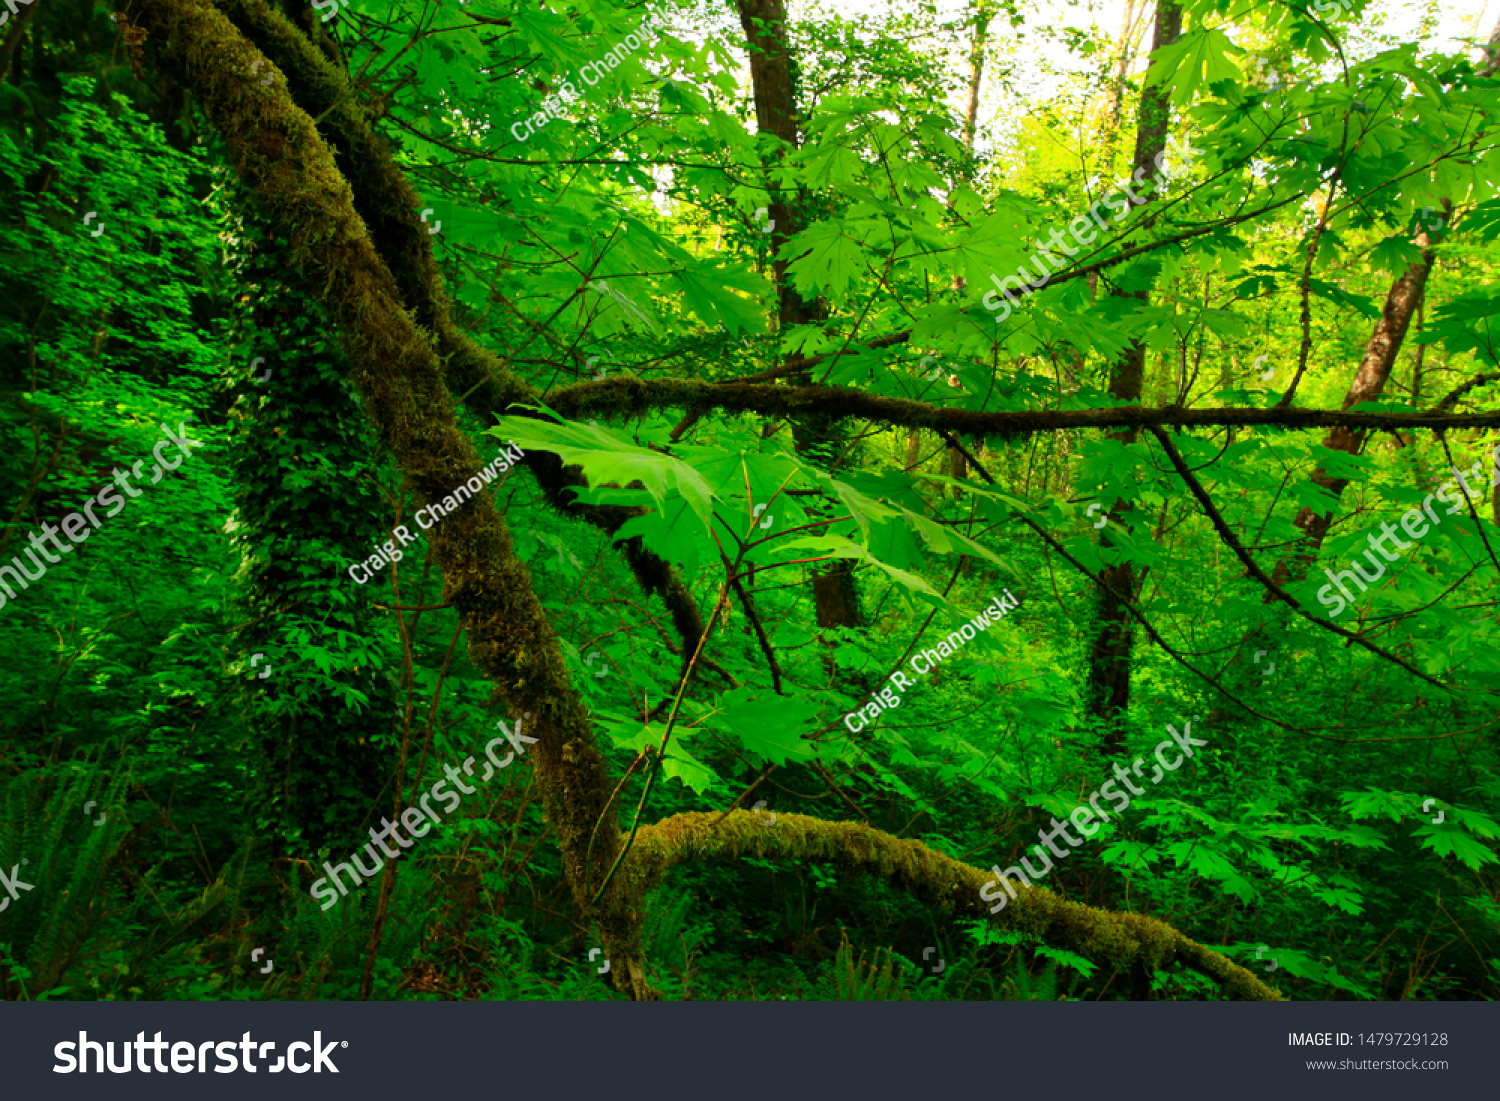 a picture of an exterior Pacific Northwest forest #1479729128